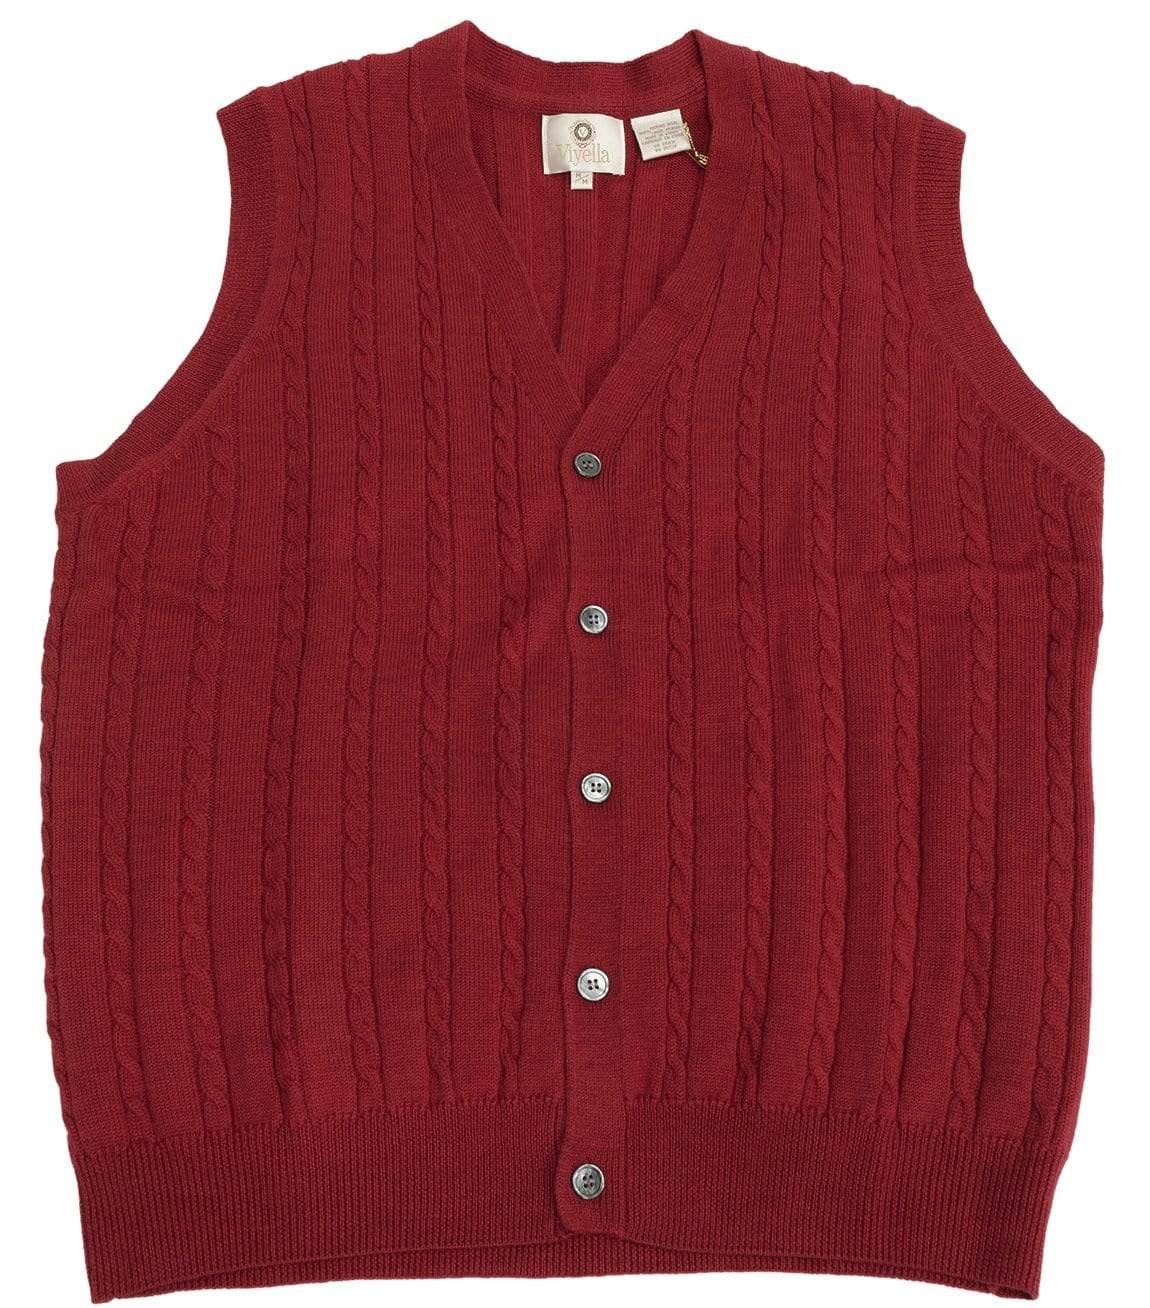 Viyella Stay Stylish and Cozy with our Extra Fine Merino Wool Cable Knit 5 Button Sweater Vest - Available in 11 Stunning Colors